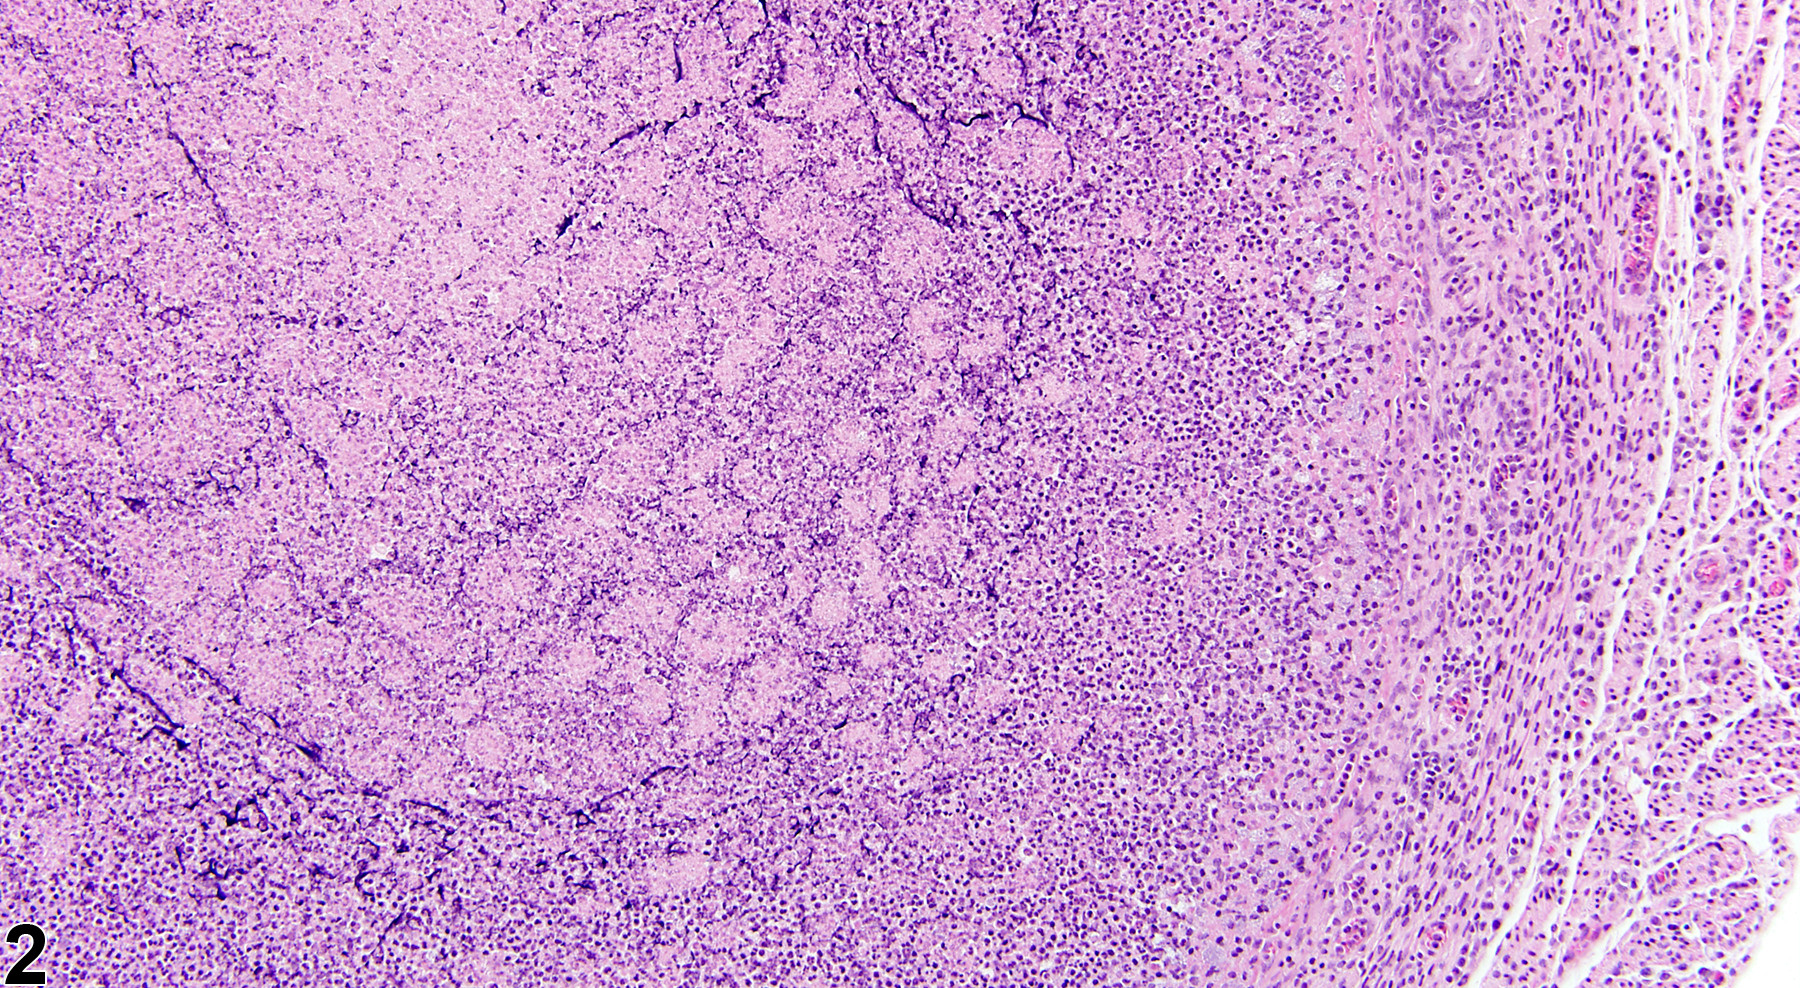 Image of inflammation, suppurative in the uterus from a female B6C3F1 mouse in a chronic study